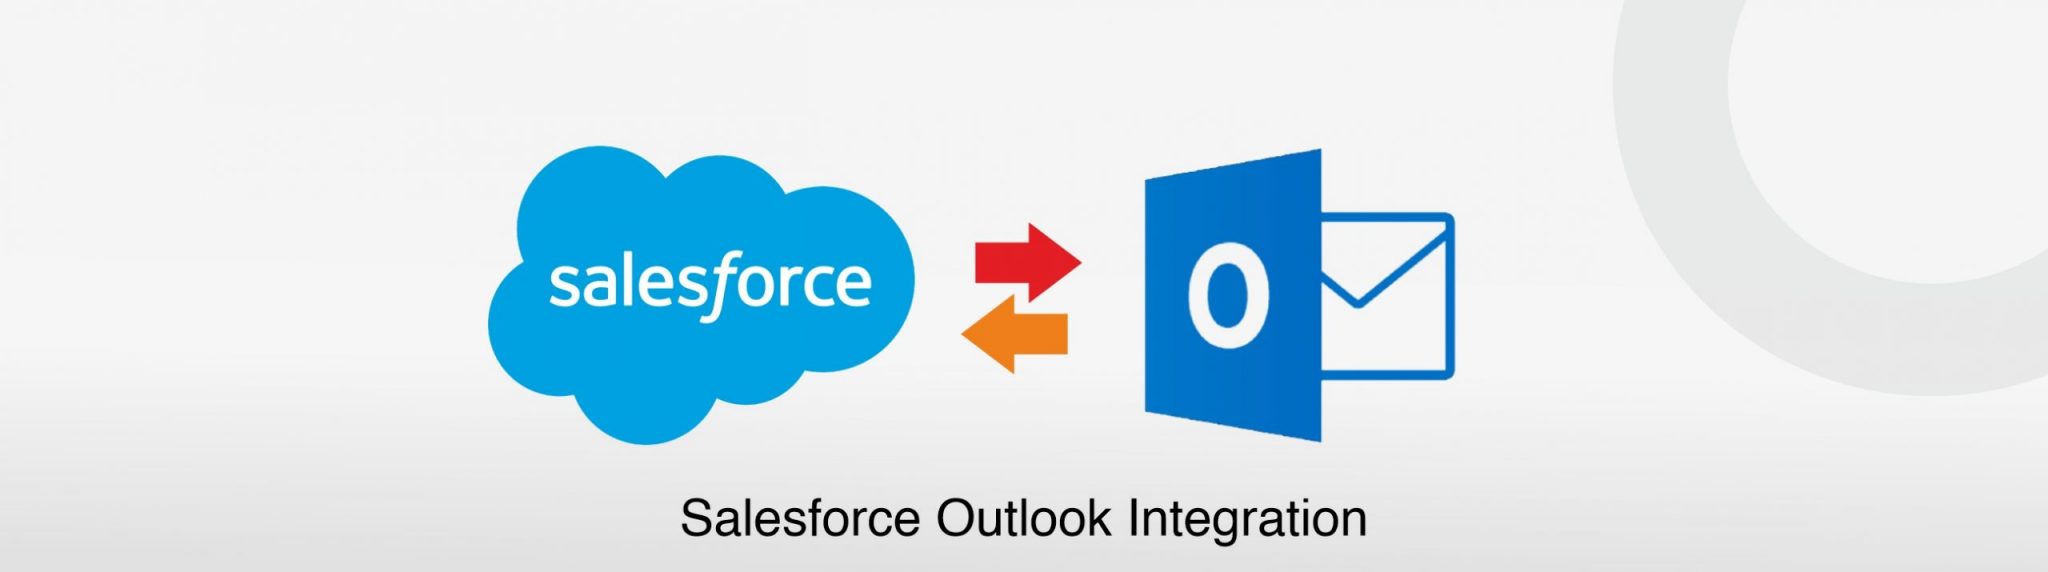 Salesforce-Outlook-Integration-scaled-1-2048x572 (1)